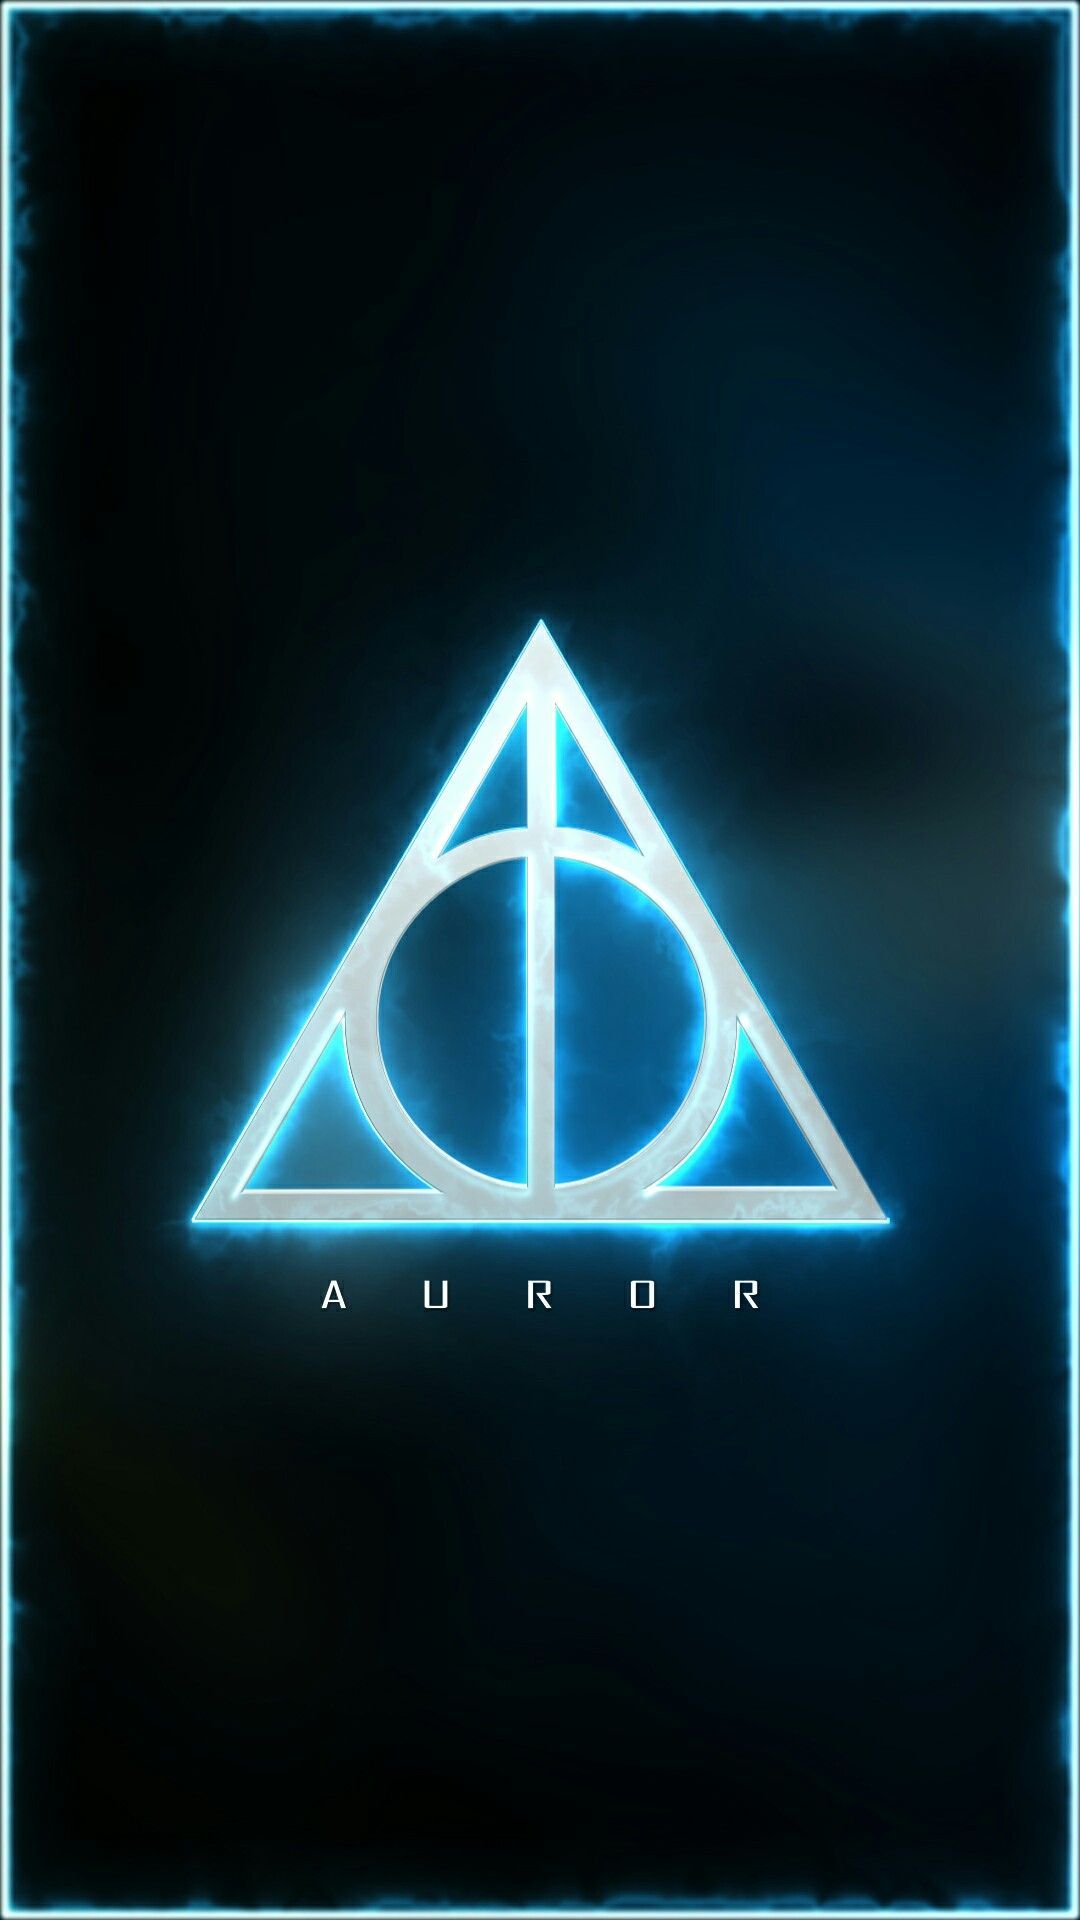 Deathly Hallows Wallpapers